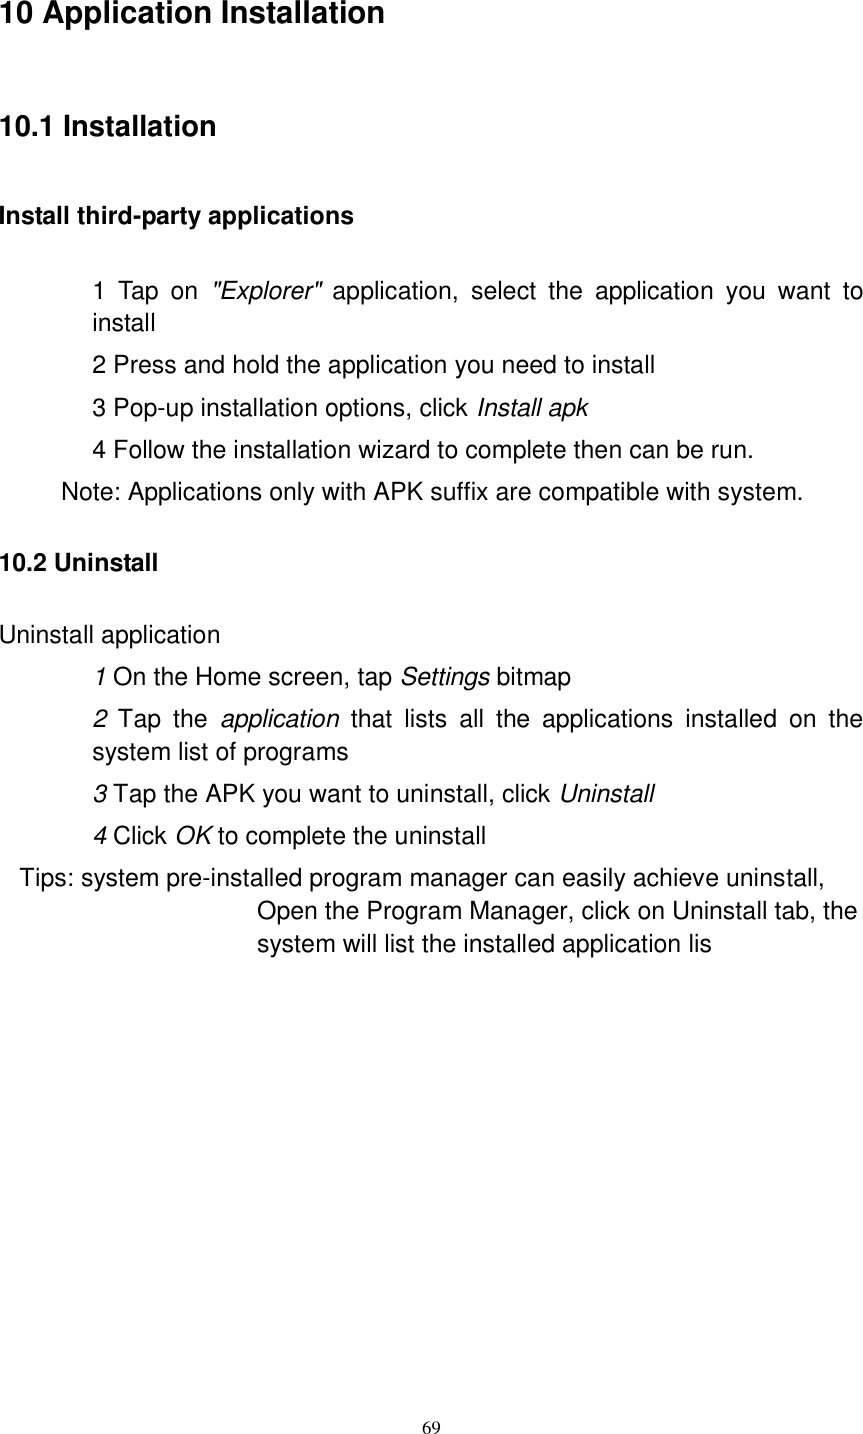      69 10 Application Installation 10.1 Installation Install third-party applications        1  Tap  on  &quot;Explorer&quot;  application,  select  the  application  you  want  to install 2 Press and hold the application you need to install 3 Pop-up installation options, click Install apk 4 Follow the installation wizard to complete then can be run.   Note: Applications only with APK suffix are compatible with system. 10.2 Uninstall Uninstall application 1 On the Home screen, tap Settings bitmap 2  Tap  the  application  that  lists  all  the  applications  installed  on  the system list of programs 3 Tap the APK you want to uninstall, click Uninstall 4 Click OK to complete the uninstall Tips: system pre-installed program manager can easily achieve uninstall, Open the Program Manager, click on Uninstall tab, the system will list the installed application lis           